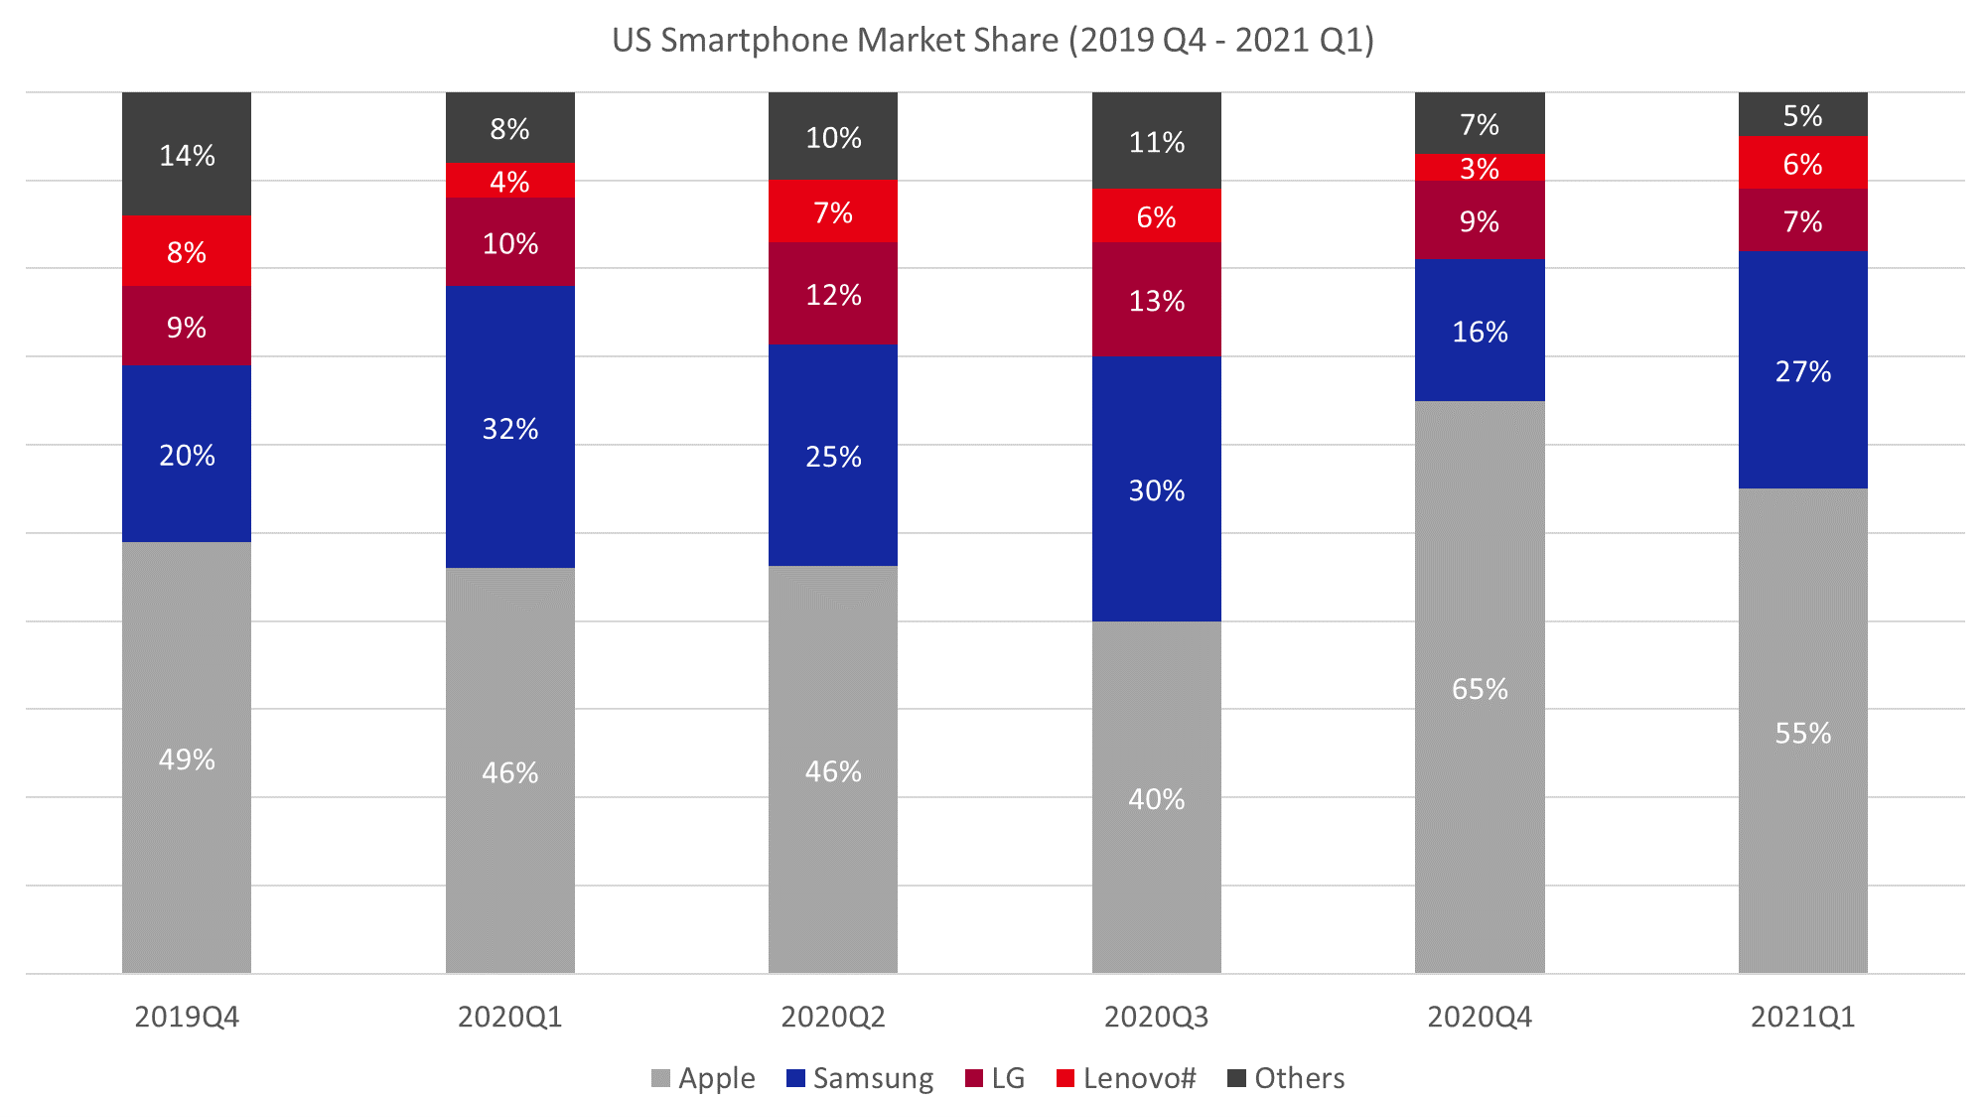 Counterpoint-Research-US-Smartphone-Quarterly-Market-Data-2019Q4-2021Q1